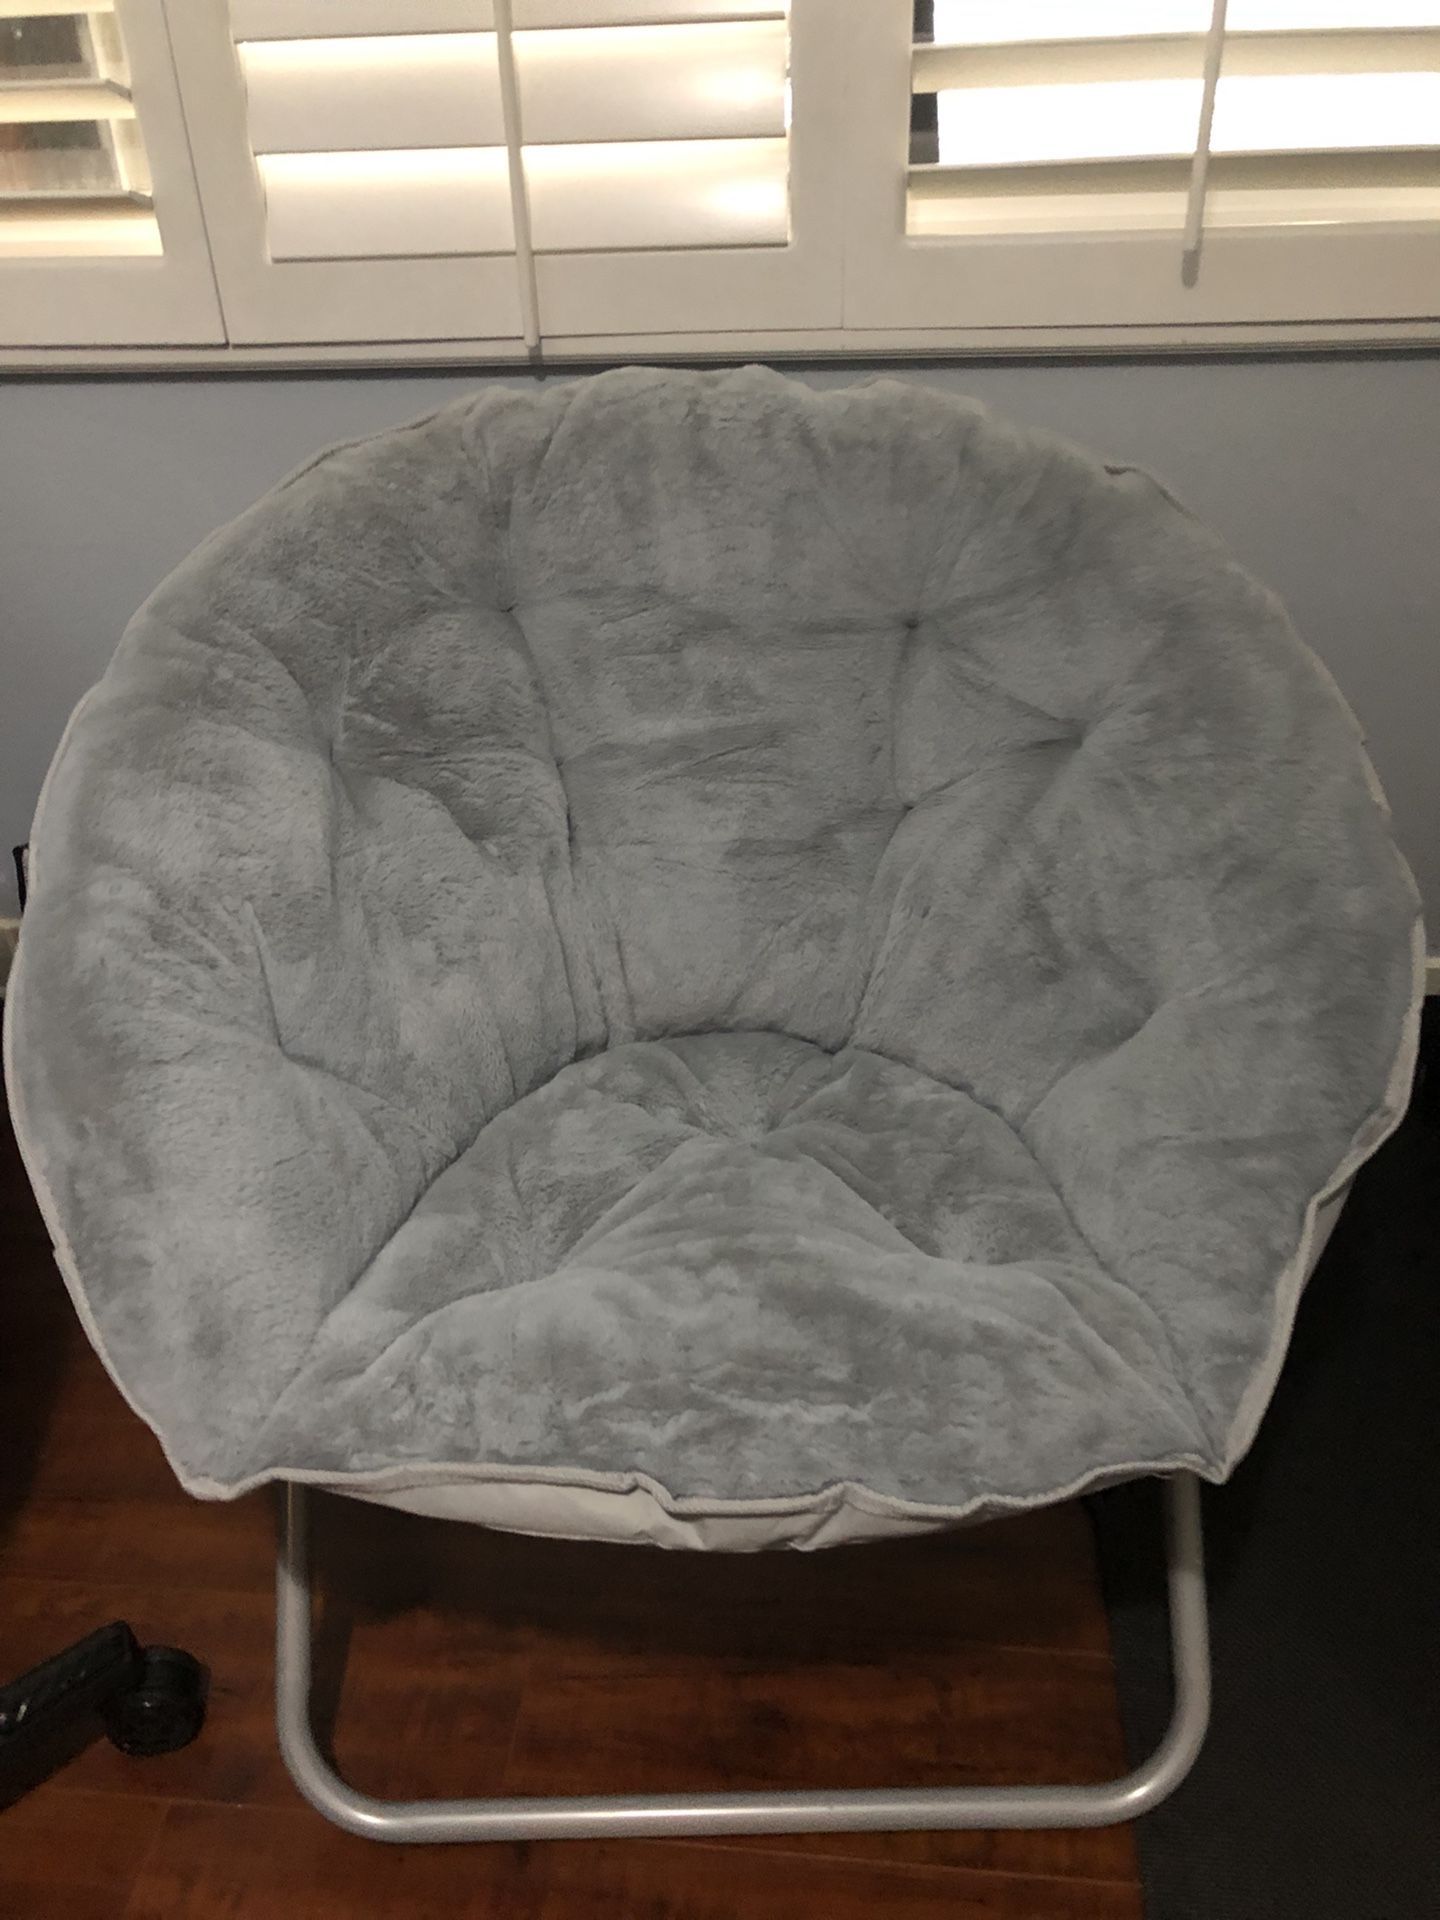 Brand New Grey Saucer Chair - Cute,  Clean, No Stains